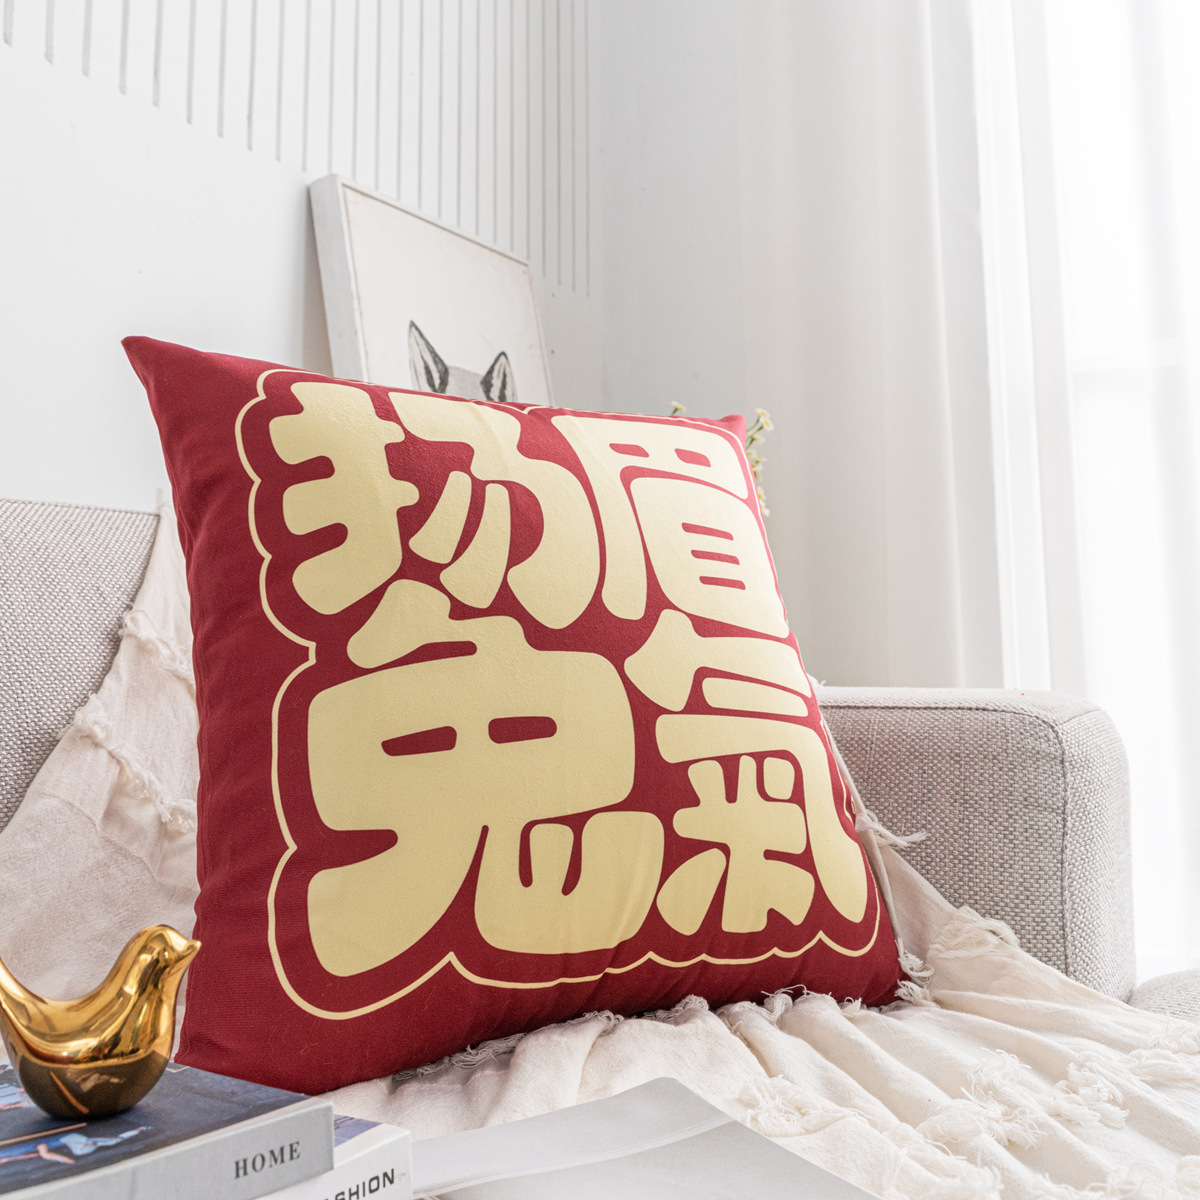 Original Guochao Year of the Rabbit Homophonic New year's pillow,enterprise Gifts Share Spring Festival Jubilation decorate